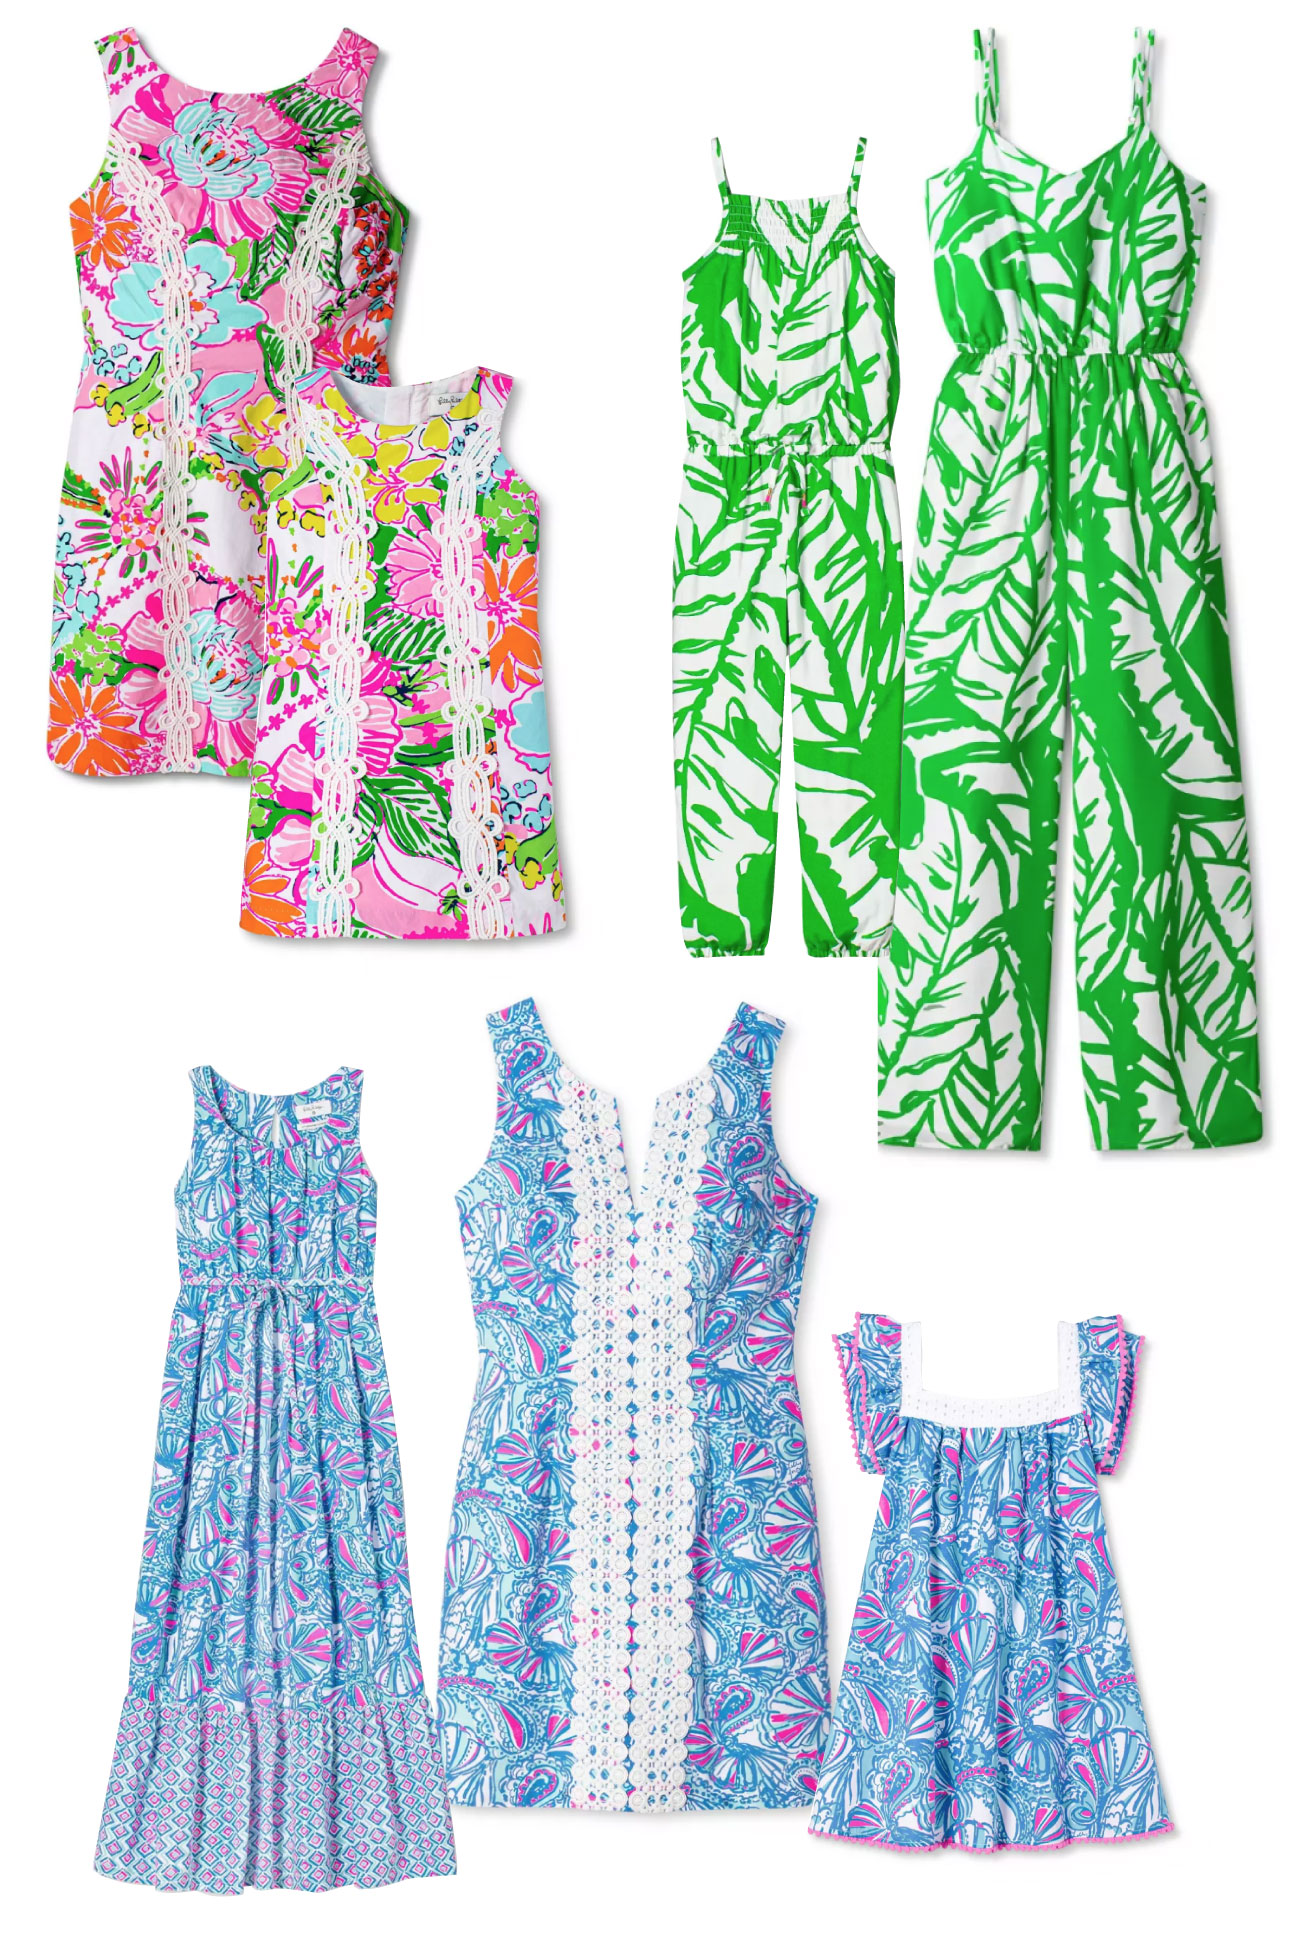 Three sets of matching women's and kids dresses and other apparel in Lilly Pulitzer's colorful florals